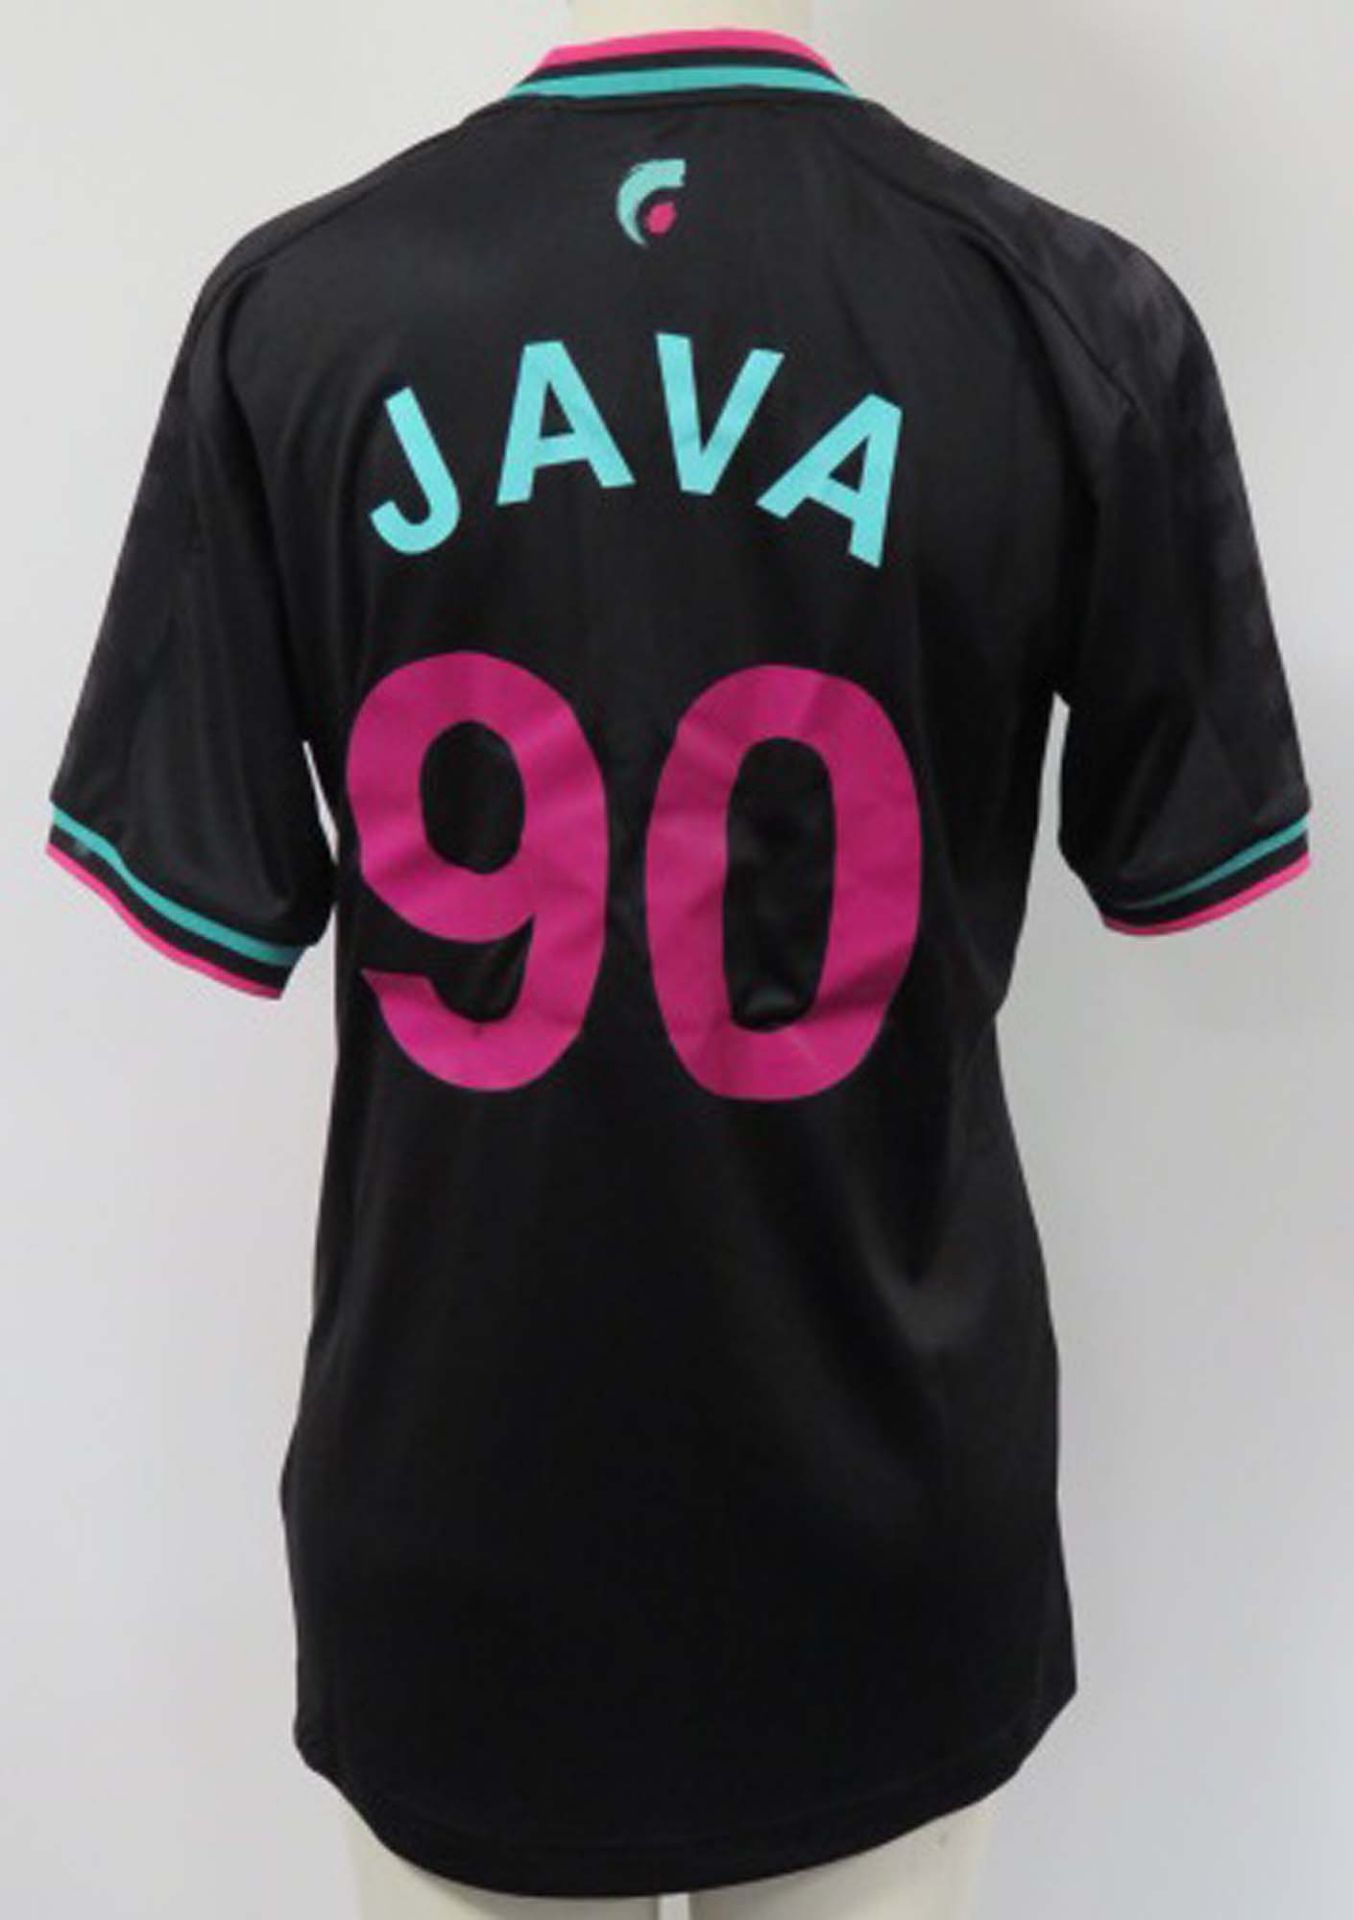 13 Meyba Lynx Java replica shirts in various sizes - Image 3 of 3